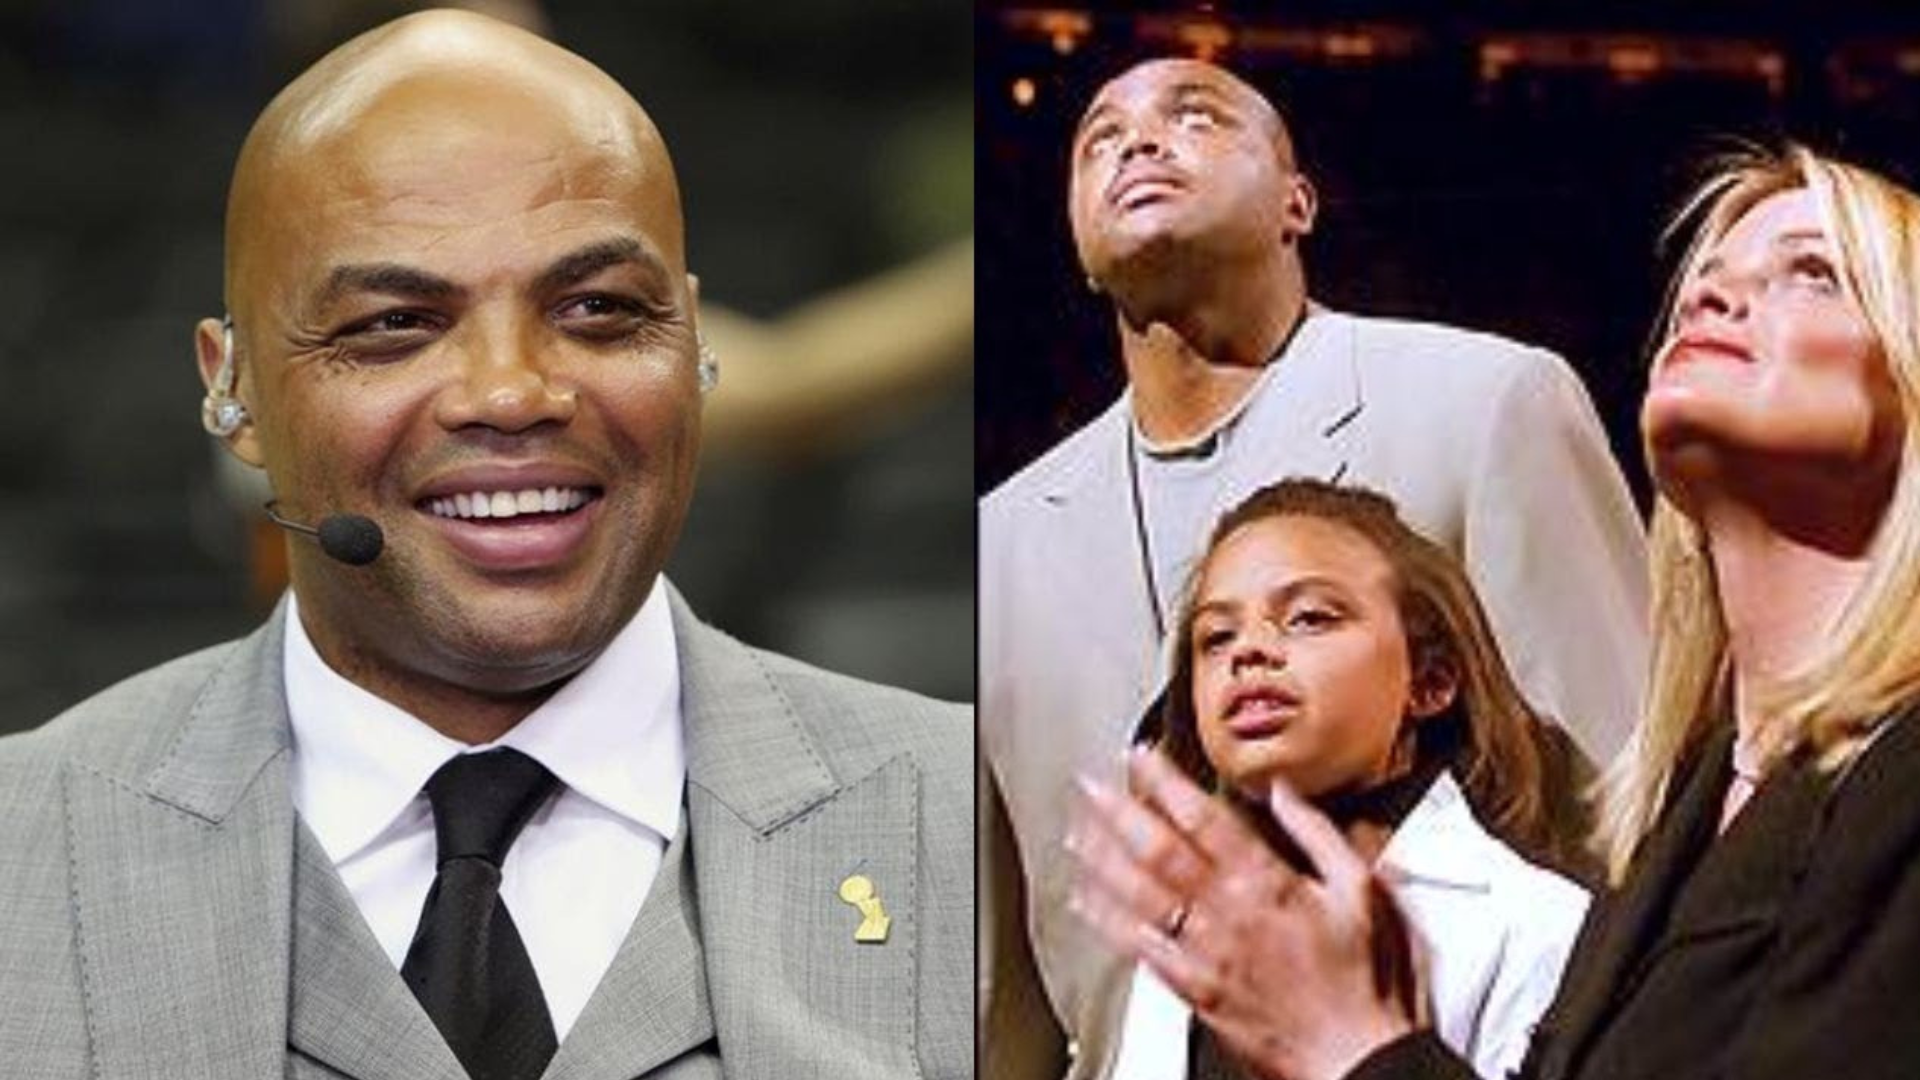 Charles Barkley in gray coat and him with his wife Maureen Blumhardt and daughter on the left